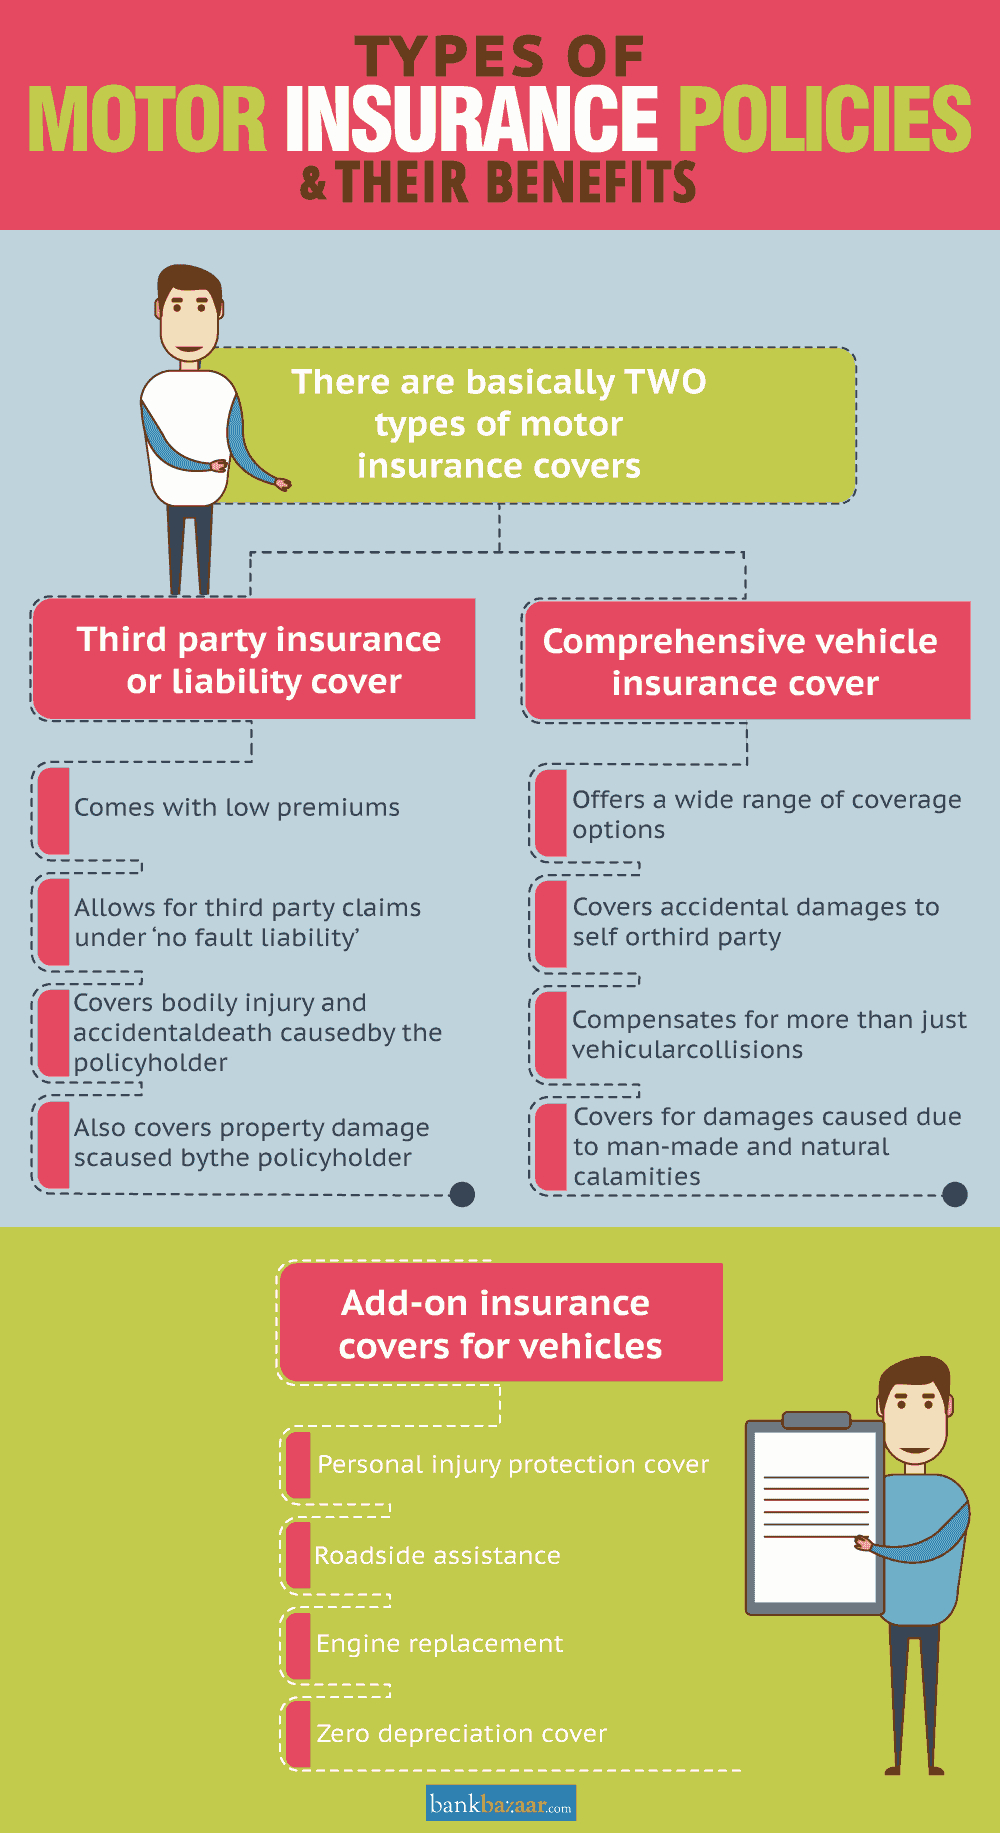 Third Party Vs Comprehensive Car Insurance 13 May 2020 within dimensions 1000 X 1833